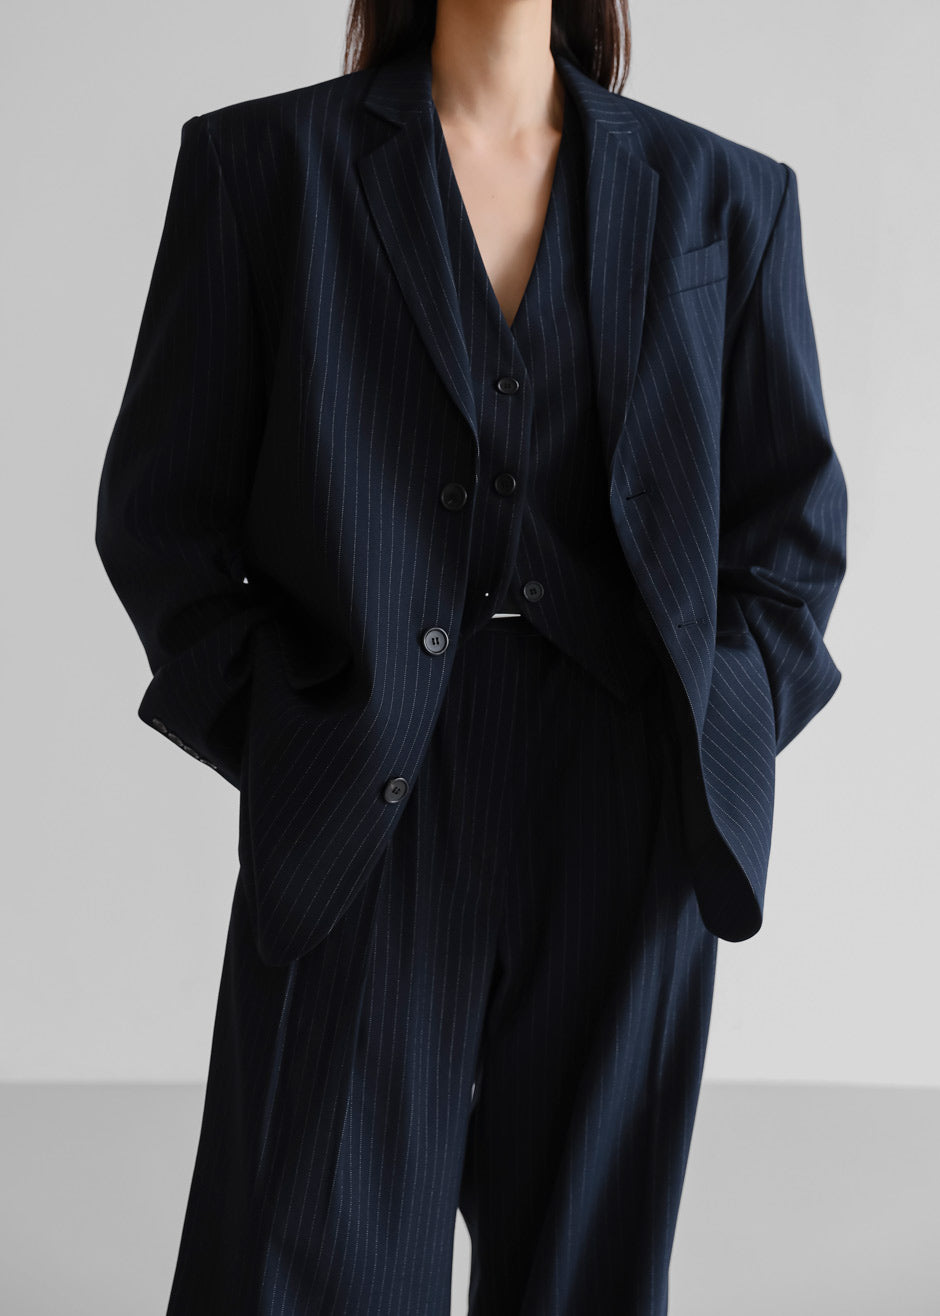 Tansy Tailored Vest - Navy Pinstripe - 9